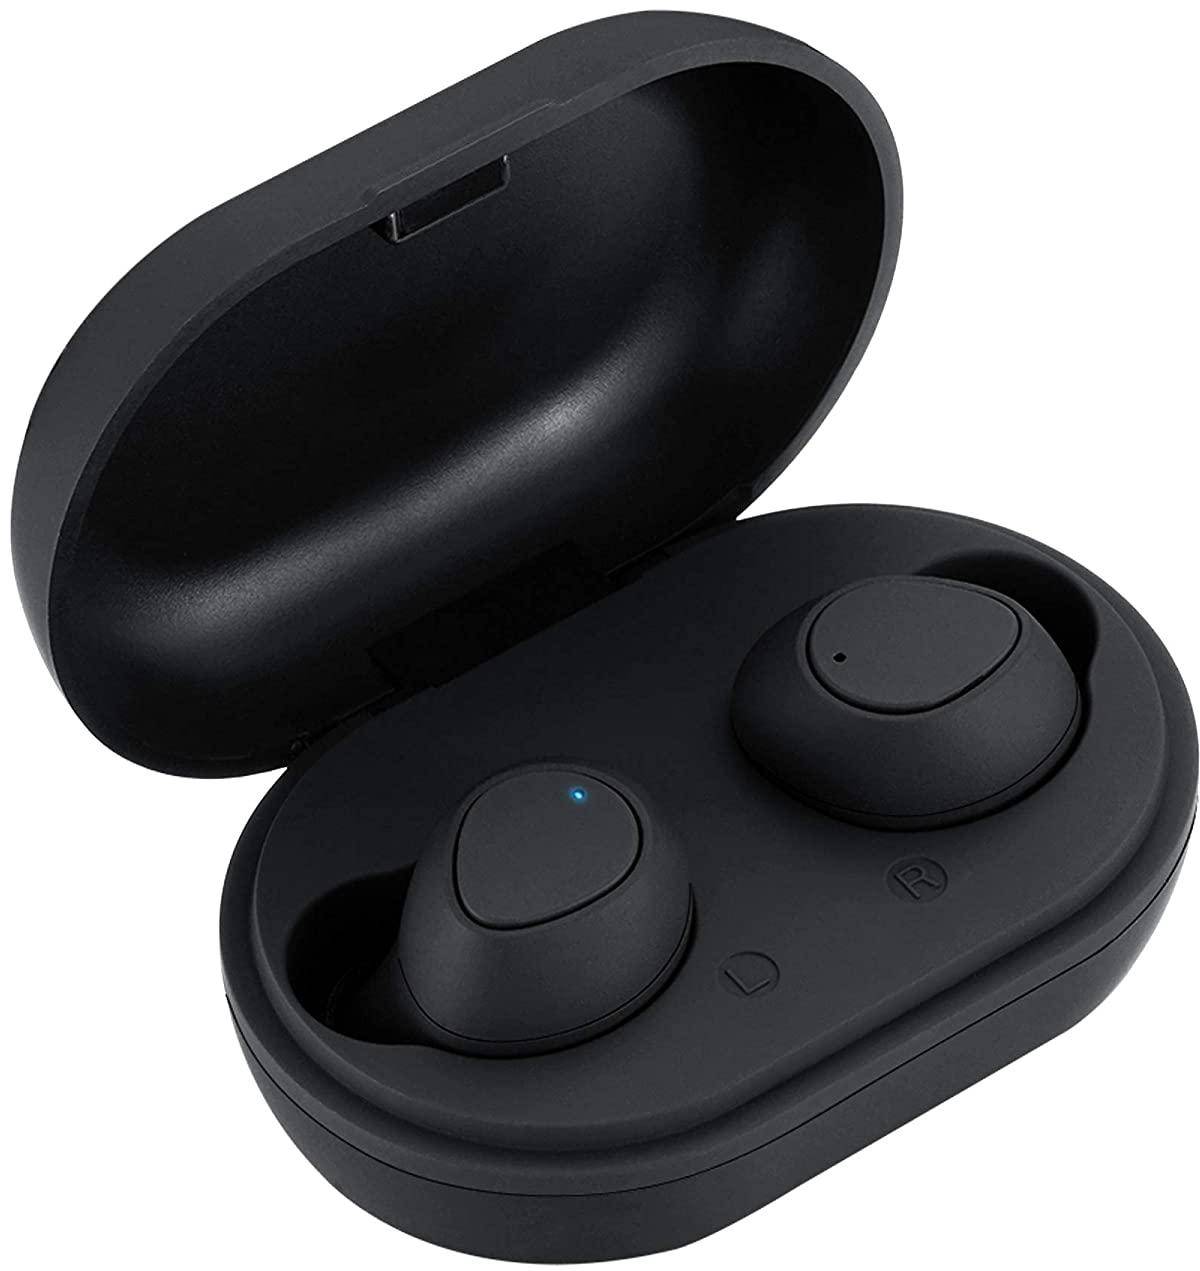 Tagg Liberty Air TWS Truly Wireless Earbuds zoom image